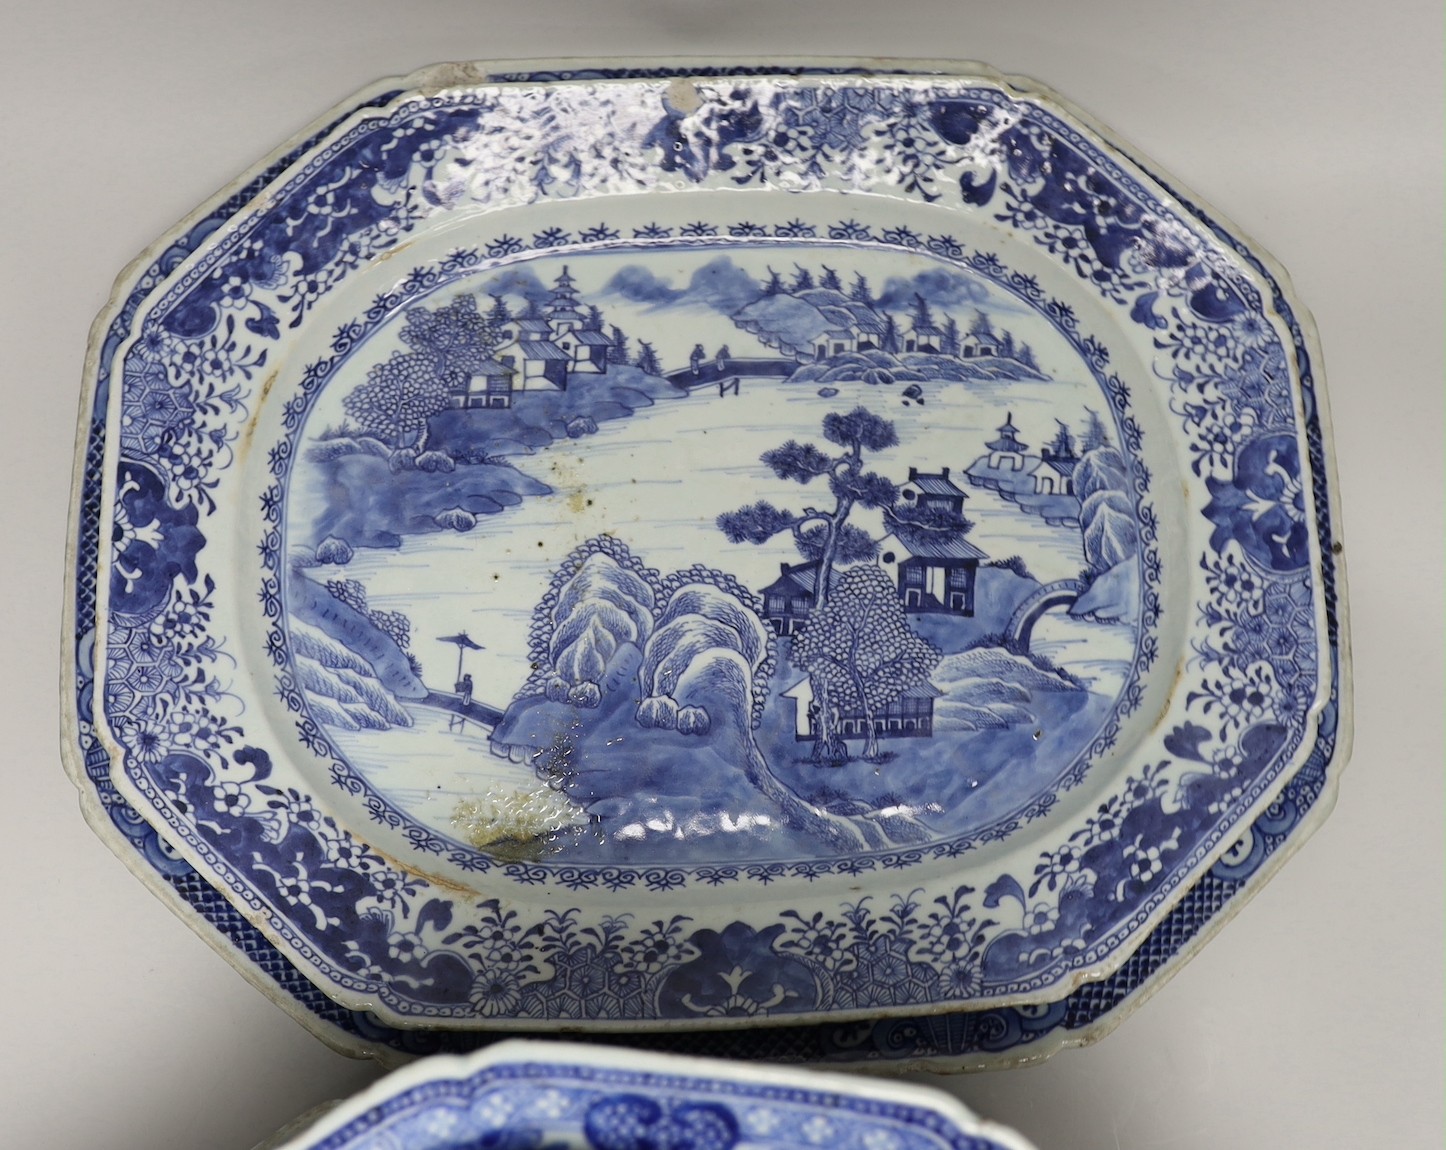 Seven late 18th century Chinese Export blue and white meat dishes, Ranging from 28 to 43. 5 cm wide